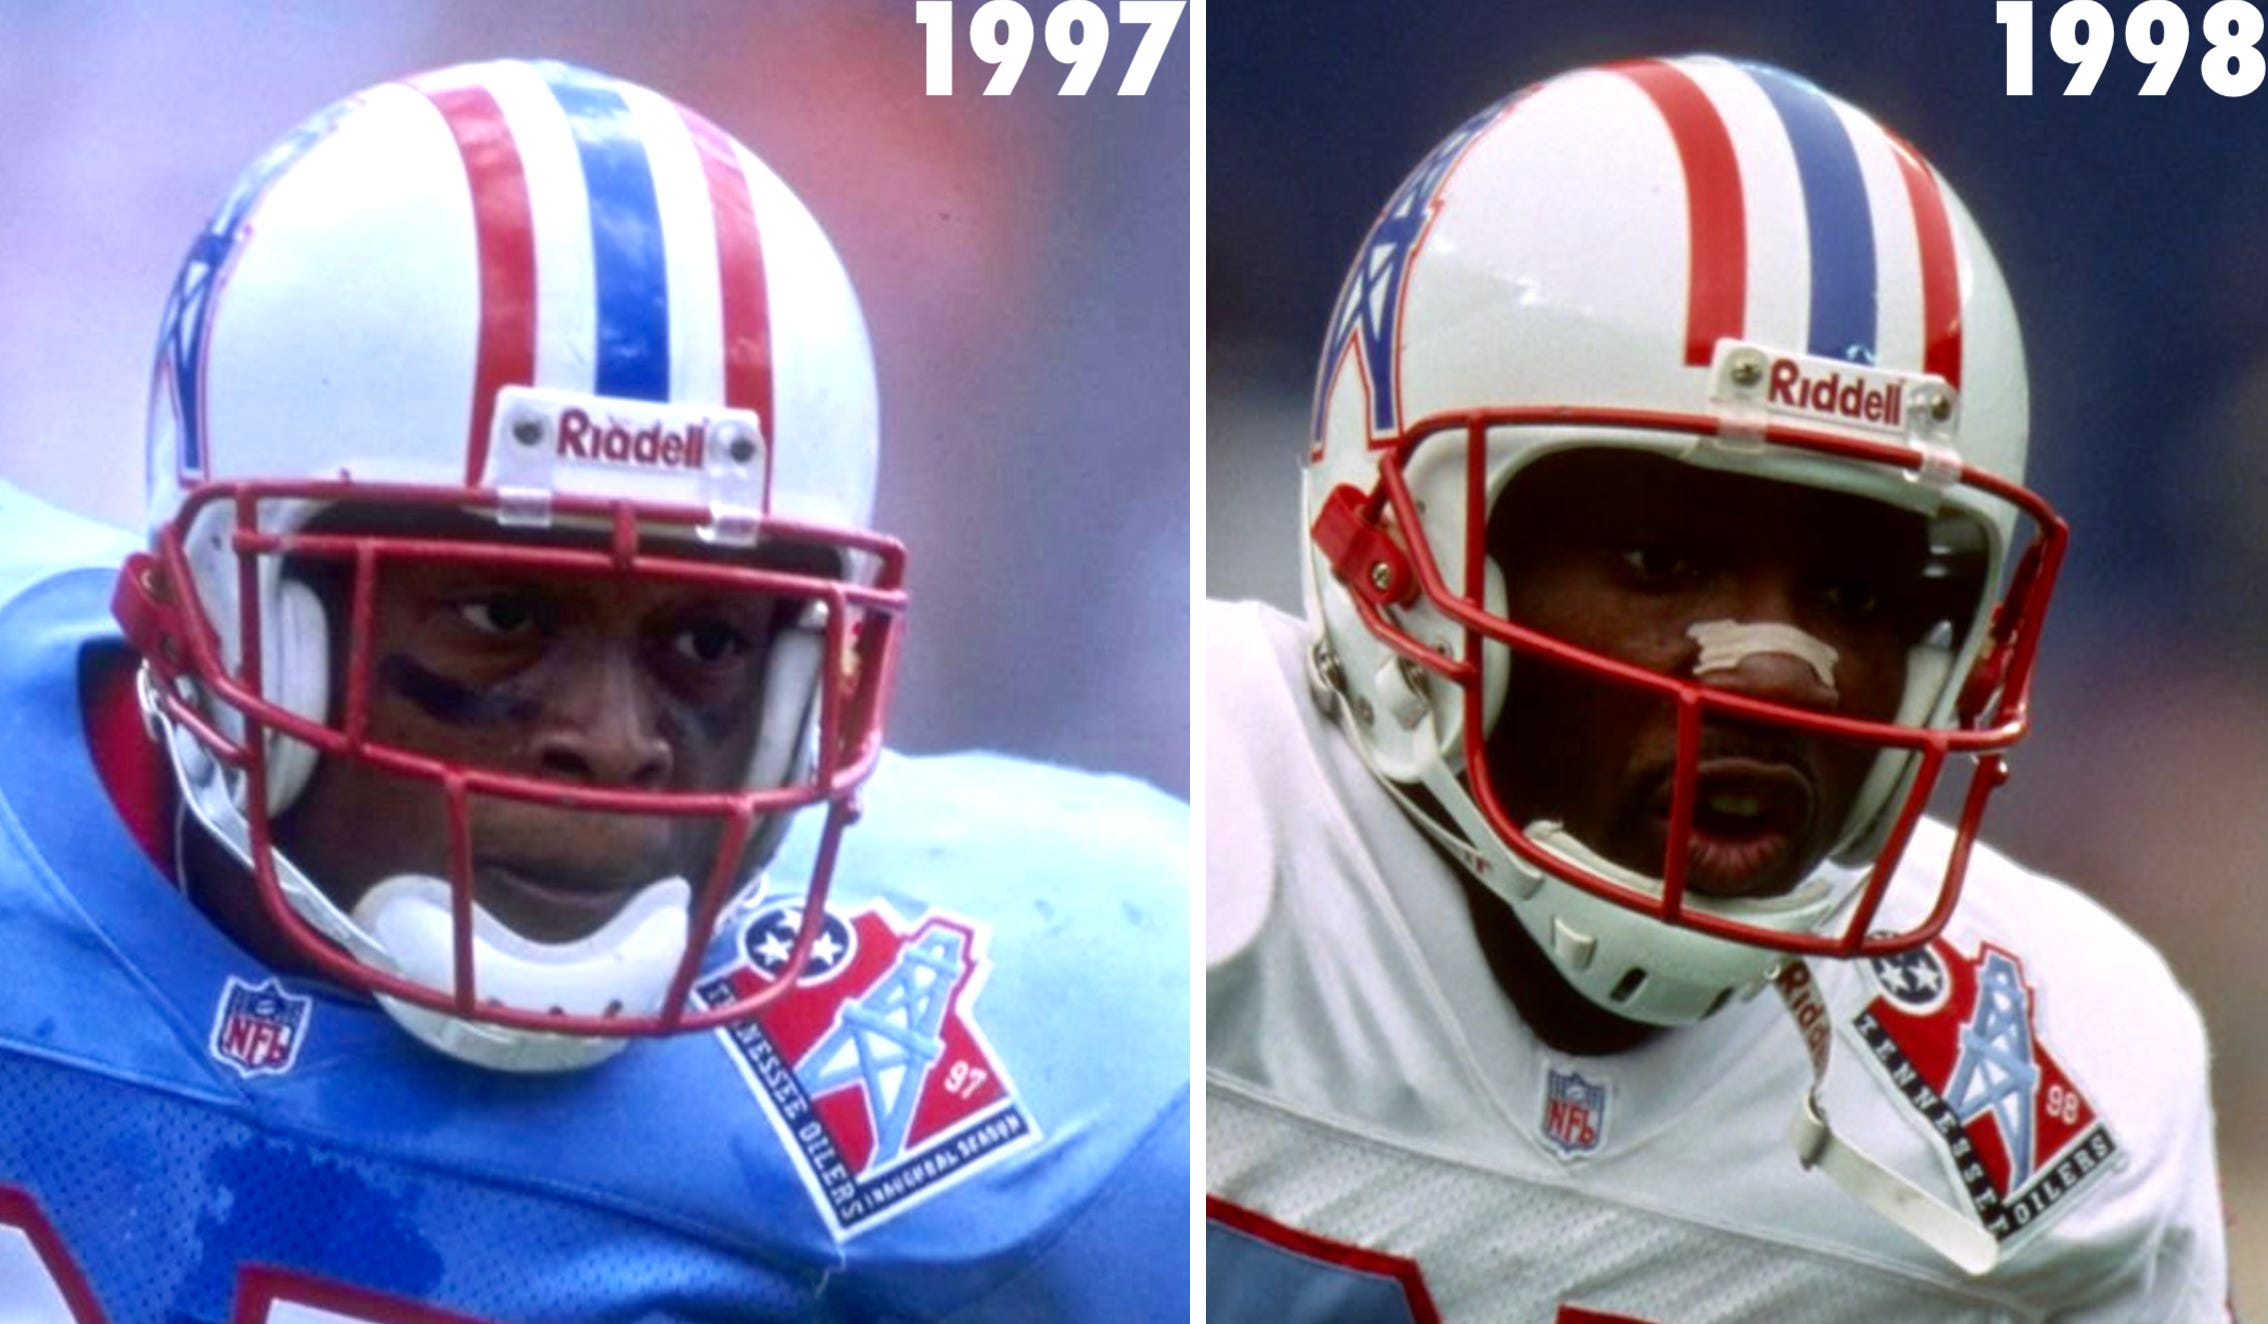 A Deep Dive on the Houston Oilers’ Uniforms by Paul Lukas